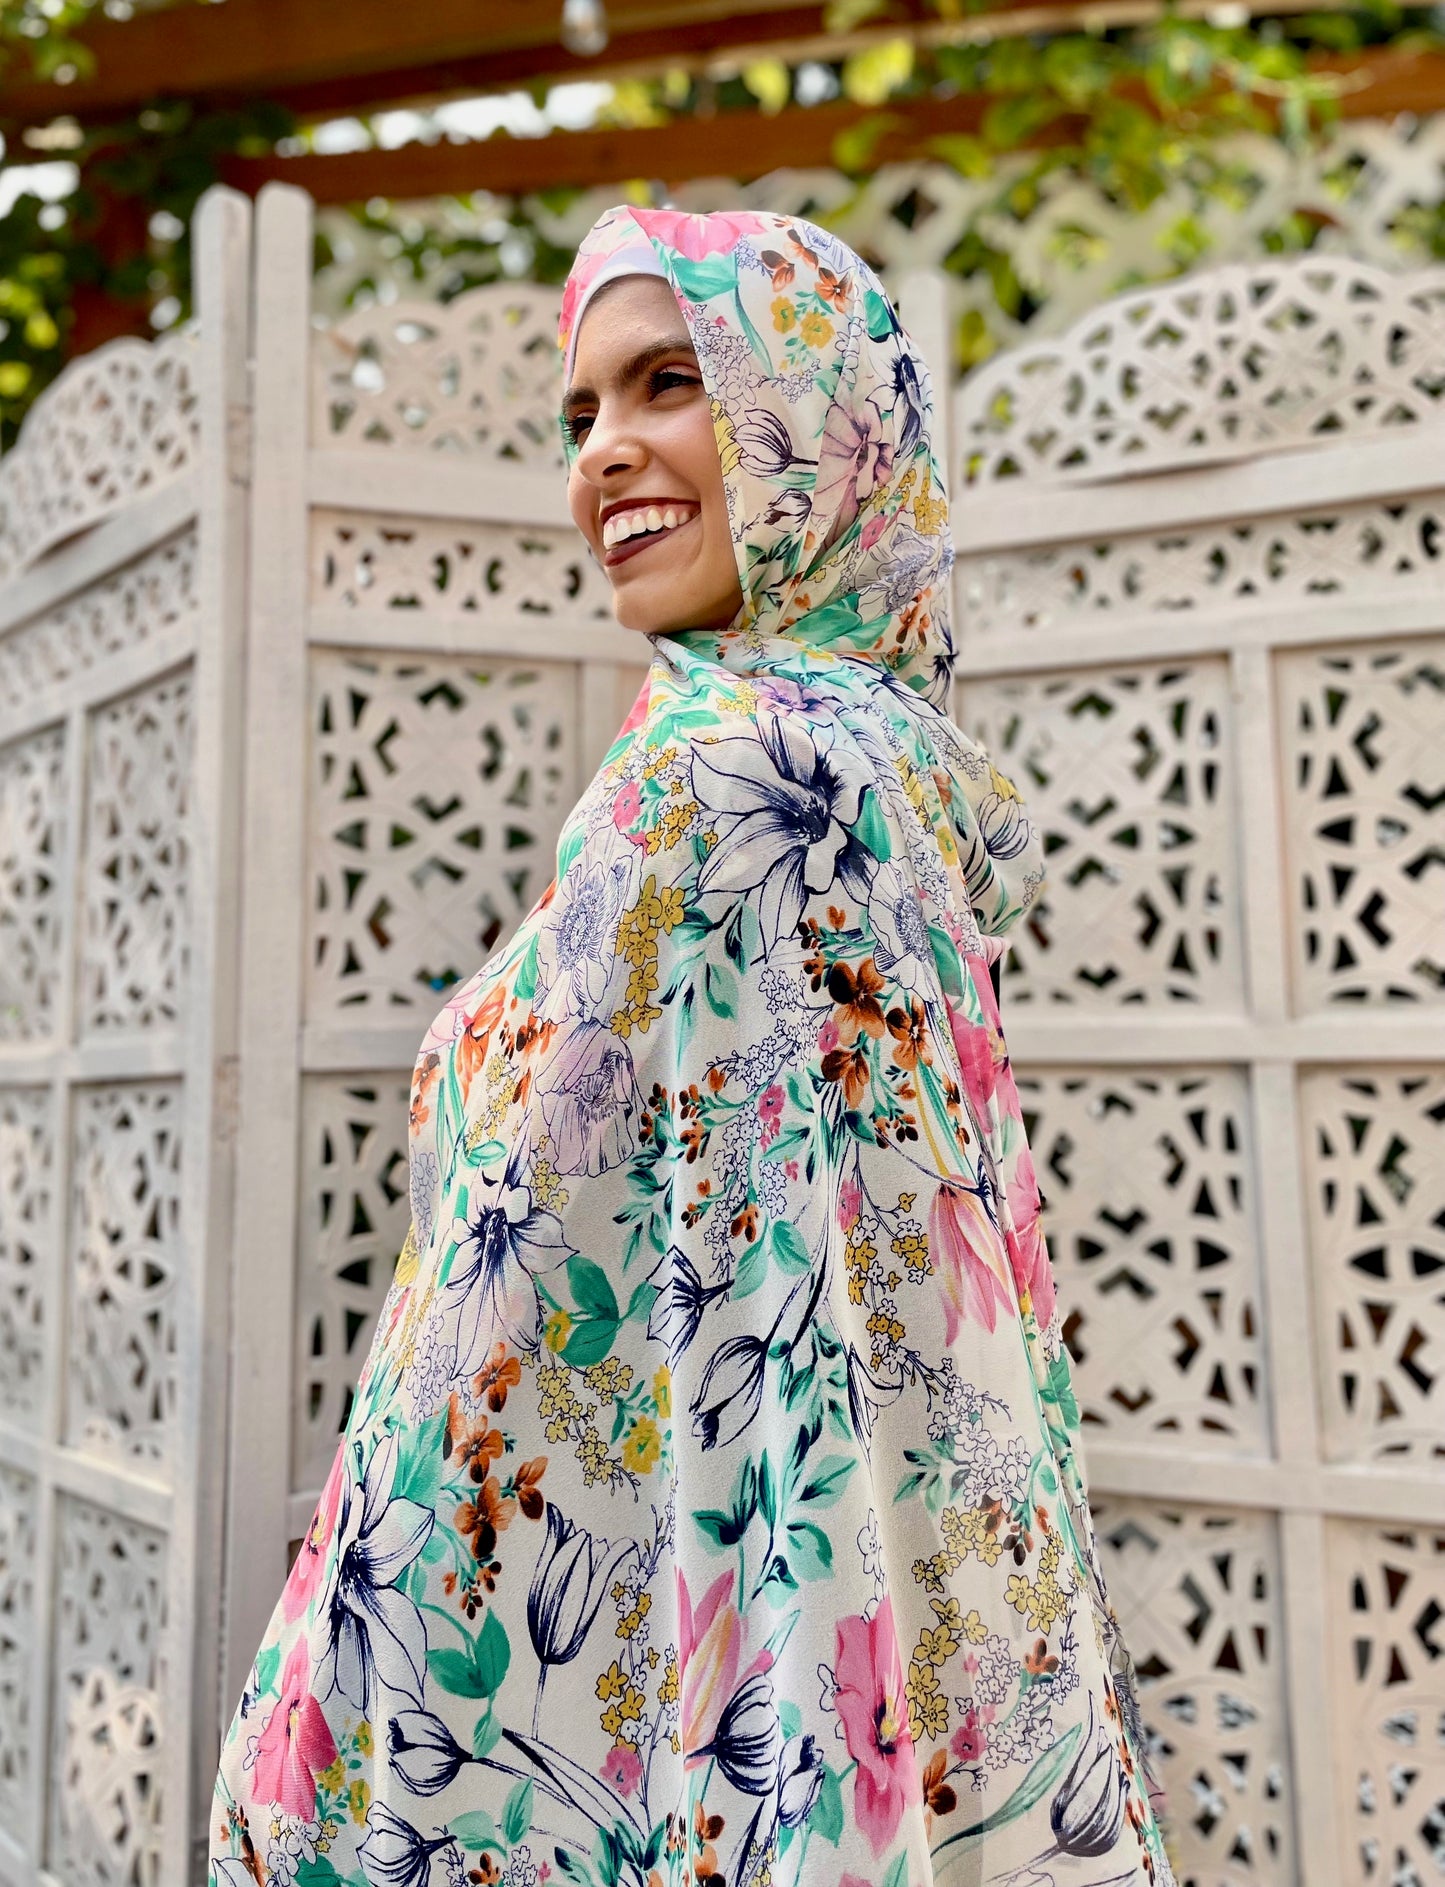 Limited Edition Crepe Chiffon Hijab: Femme Fatale Floral